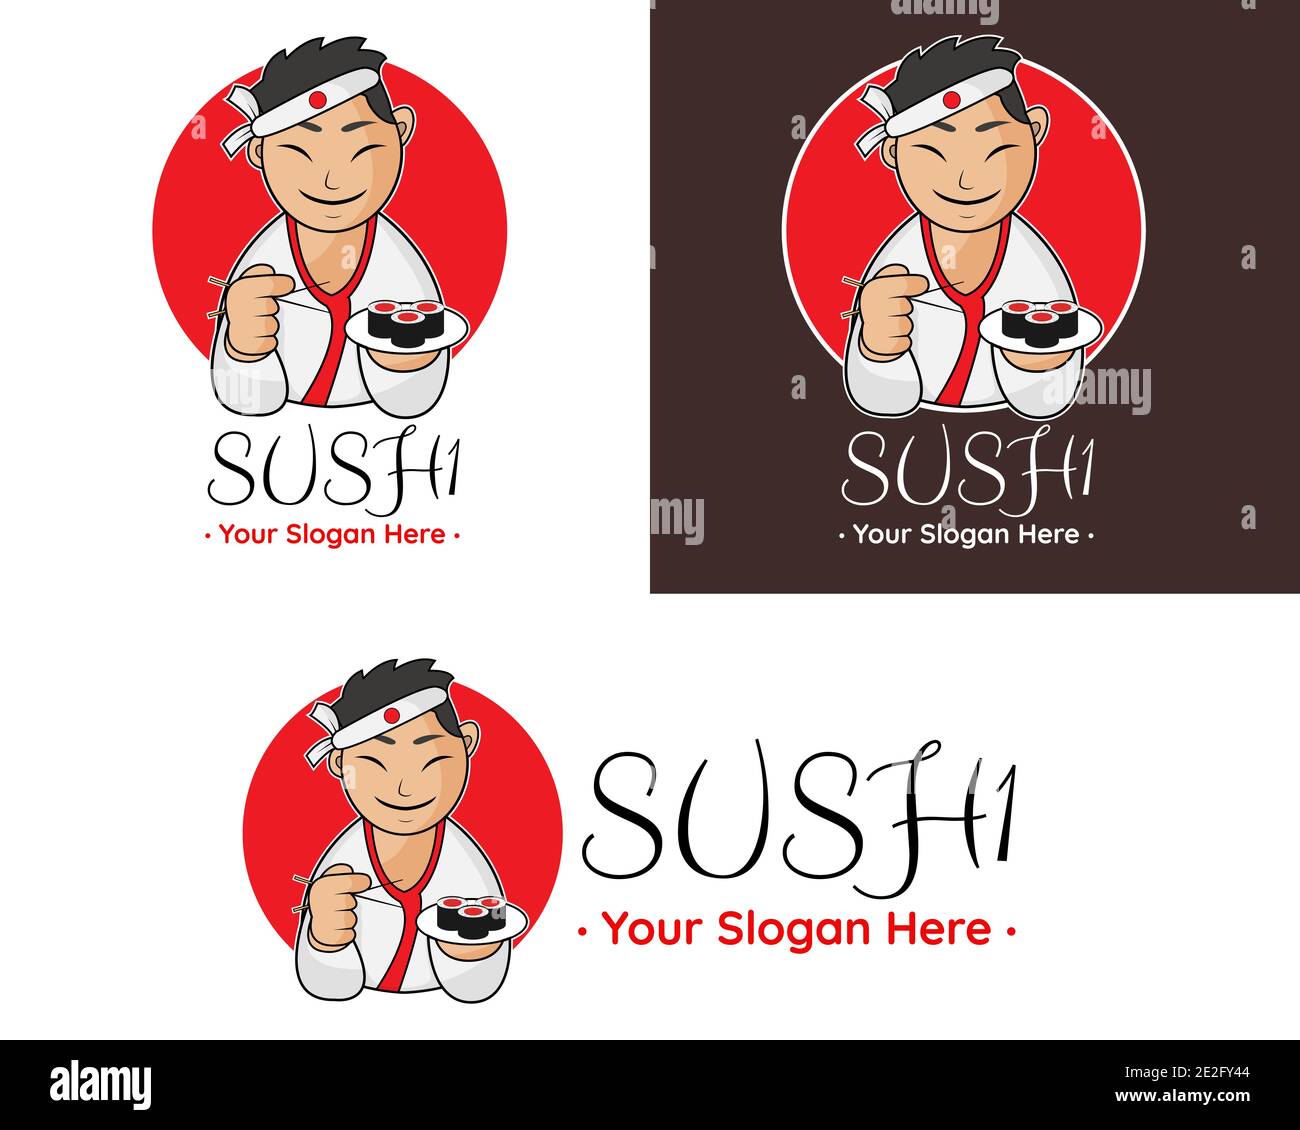 Illustration vector design of sushi logo template for your business or company Stock Vector